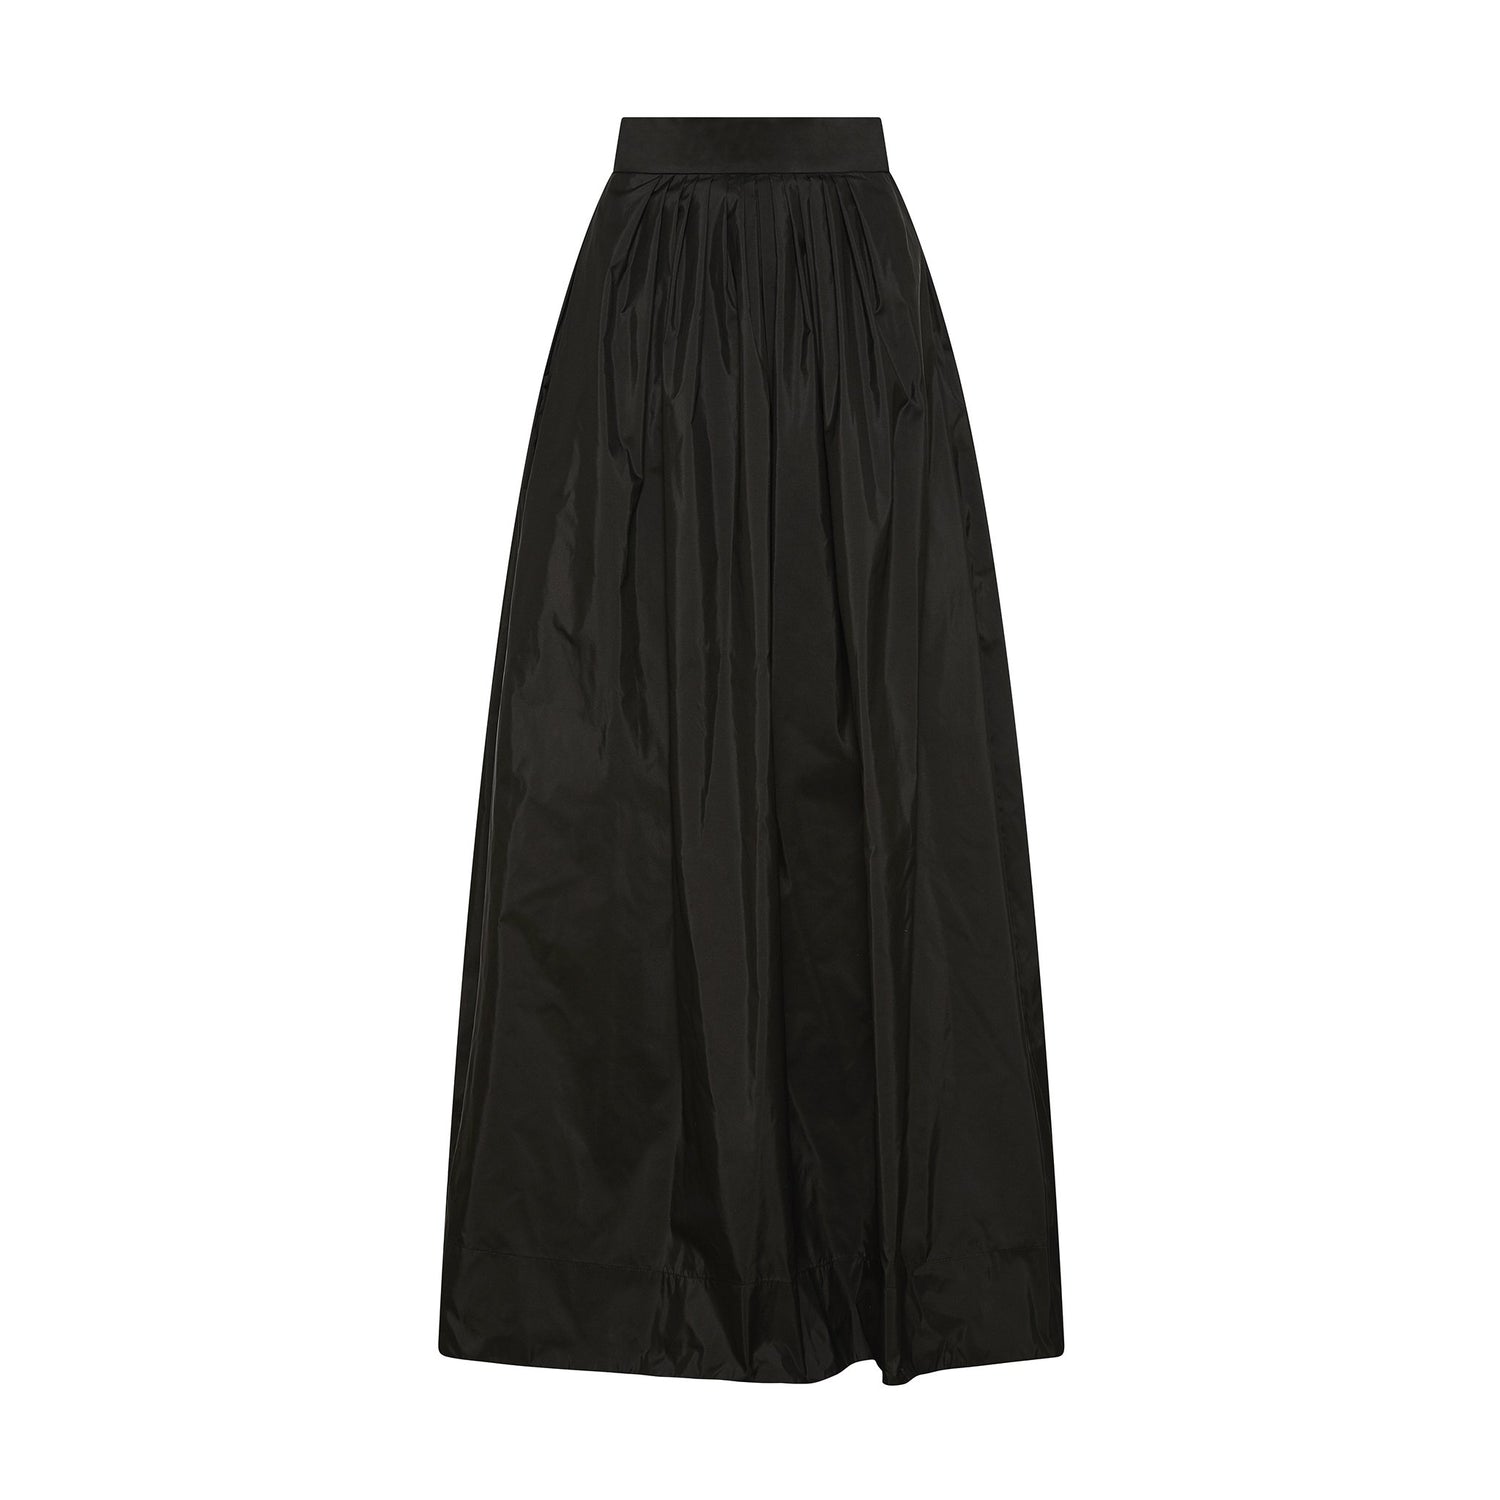 Womens Black Tafeta Maxi Ball Skirt with cinched waist and pockets 